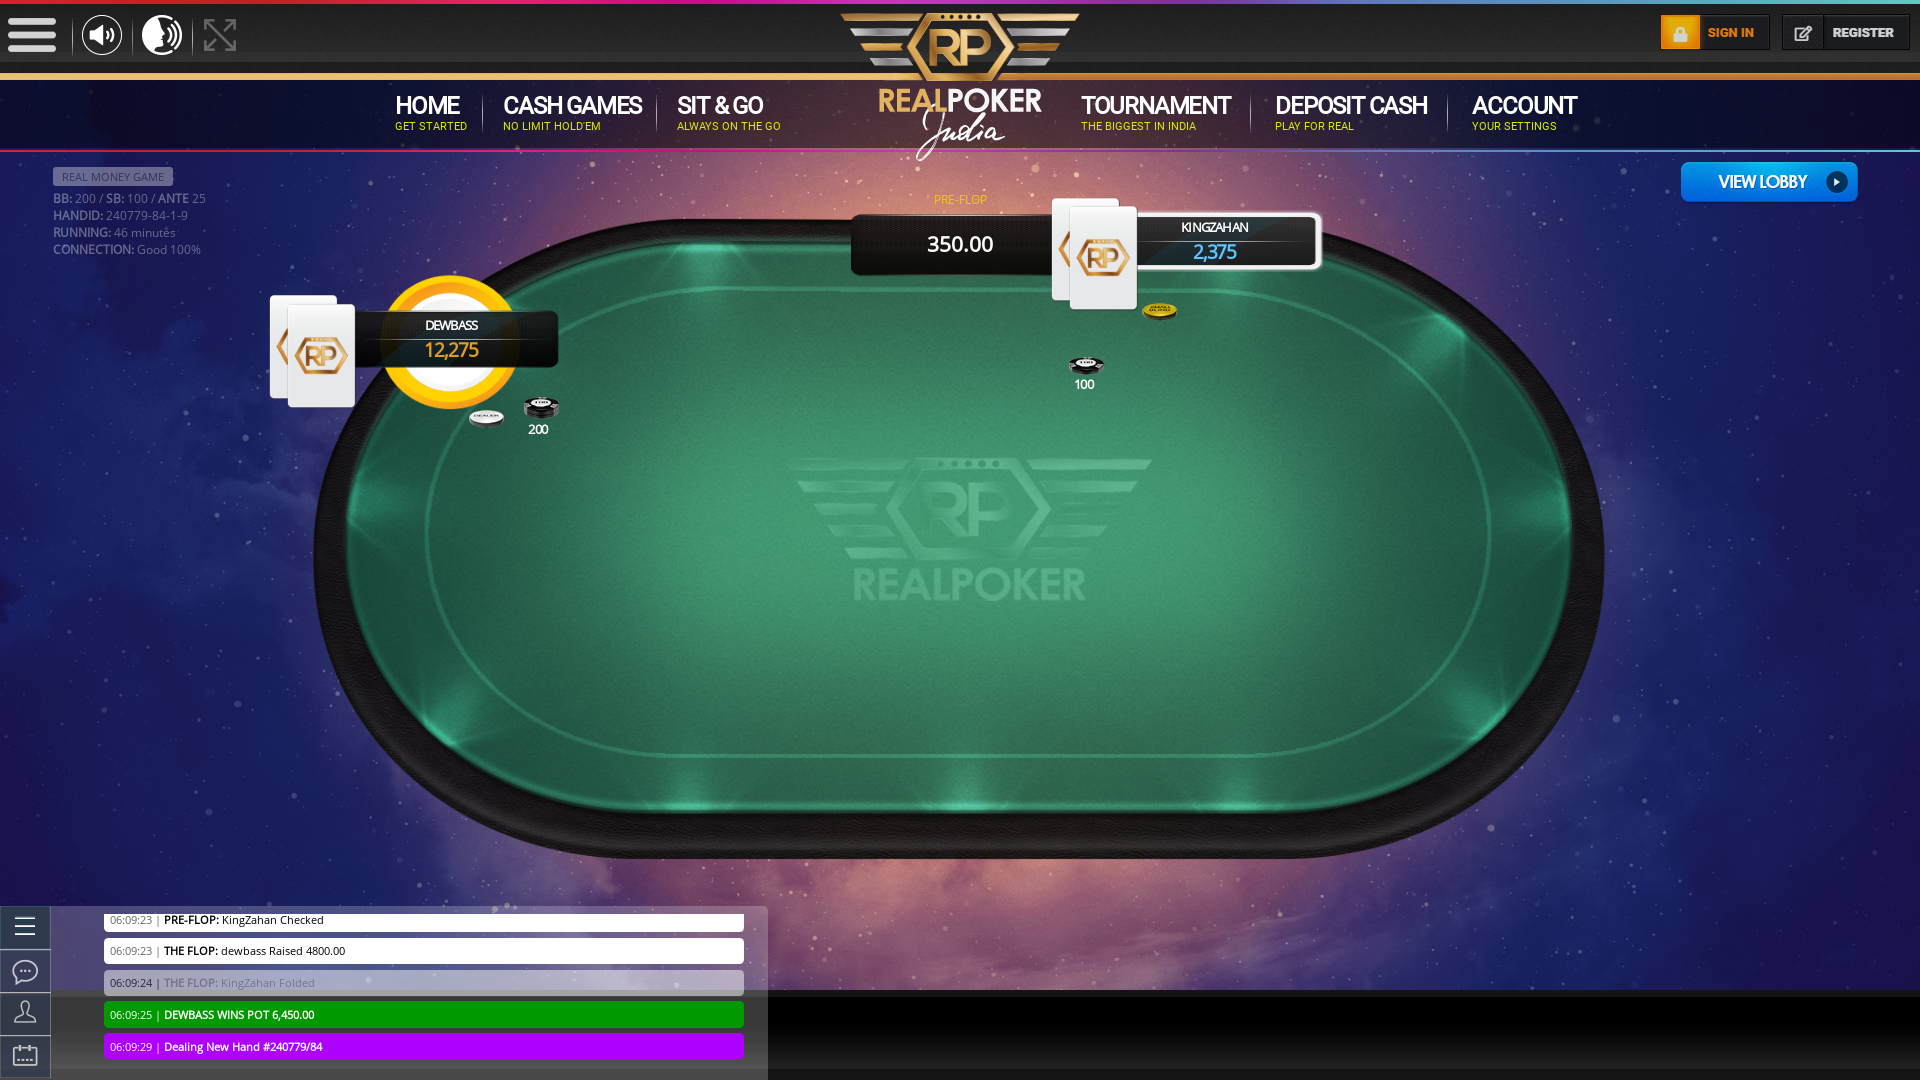 Indian online poker on a 10 player table in the 45th minute match up